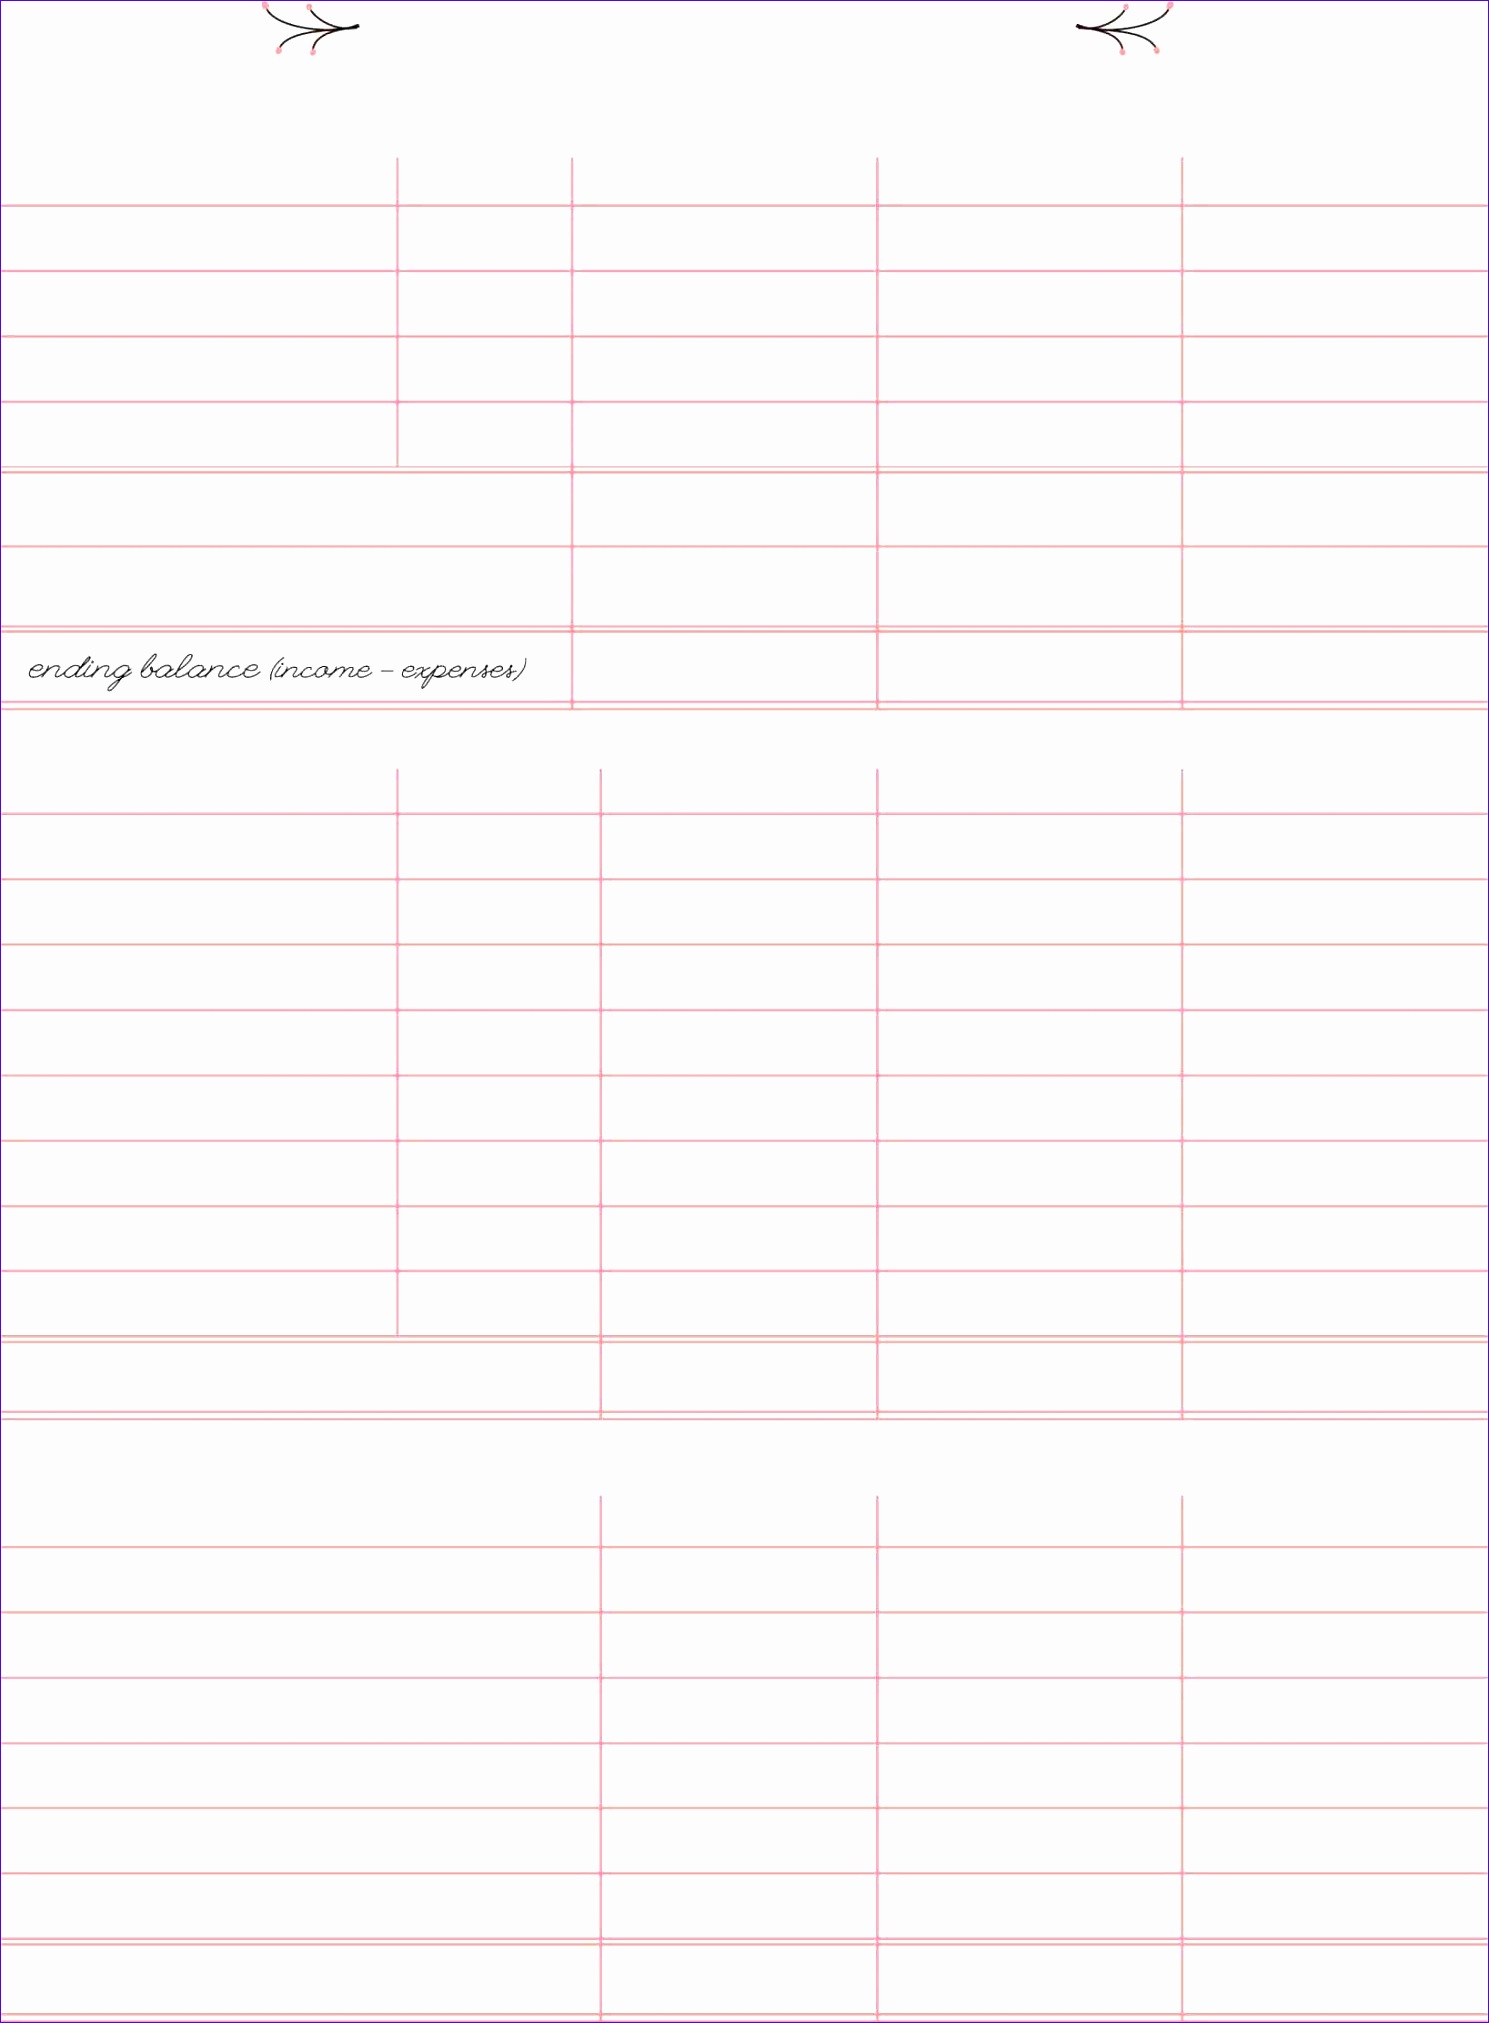 monthly bud template excel 2010 monthly bud template excel 2010 excel 2010 personal monthly bud template monthly bud template excel 2010 bi monthly bud template excel